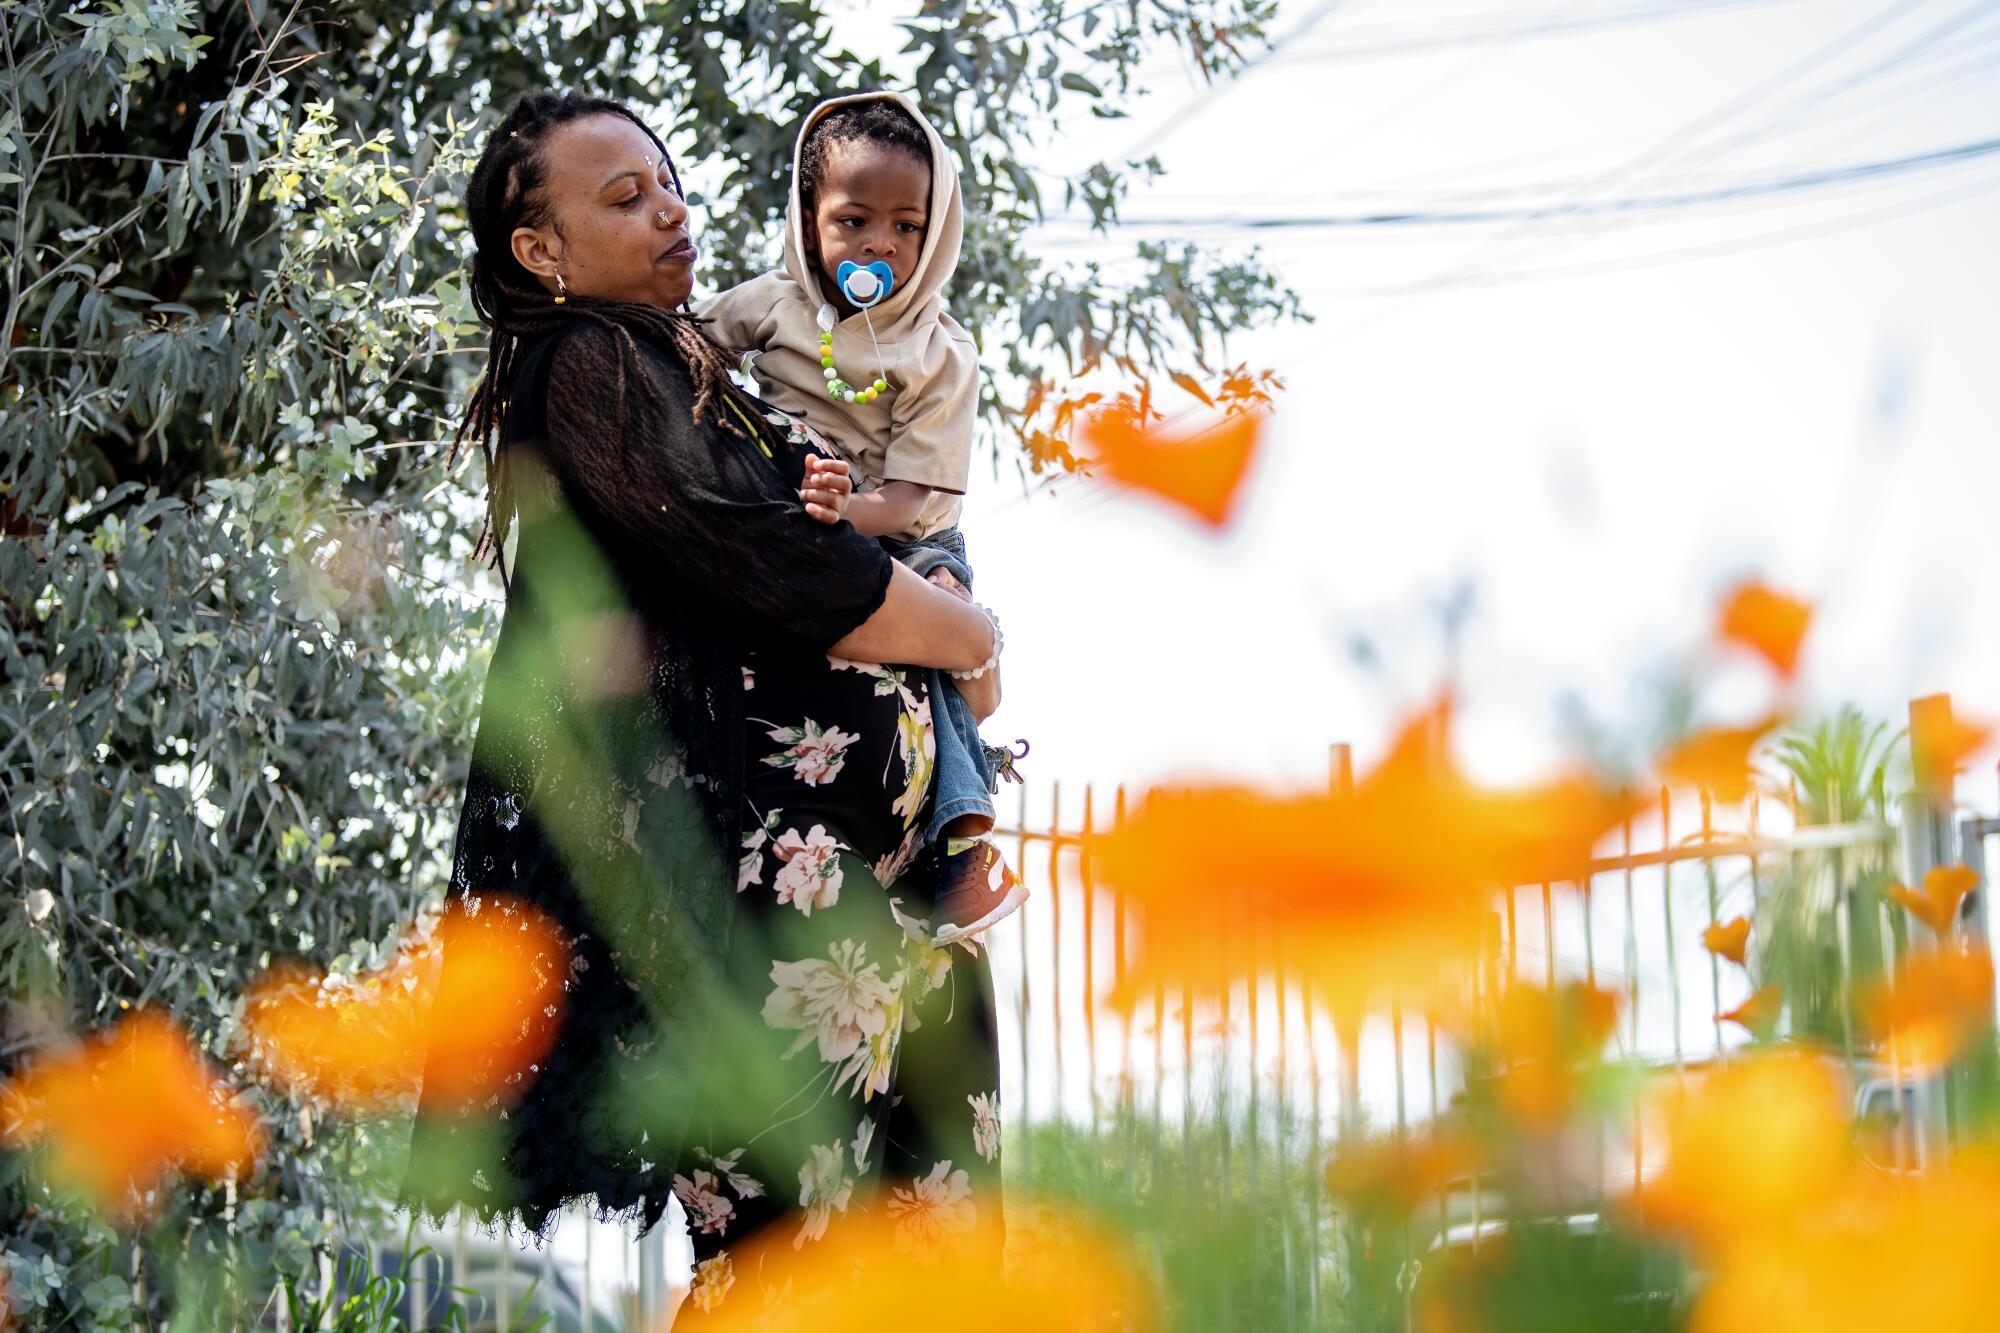 Oya Sherrills carries her 2-year-old son in front of orange flowers.